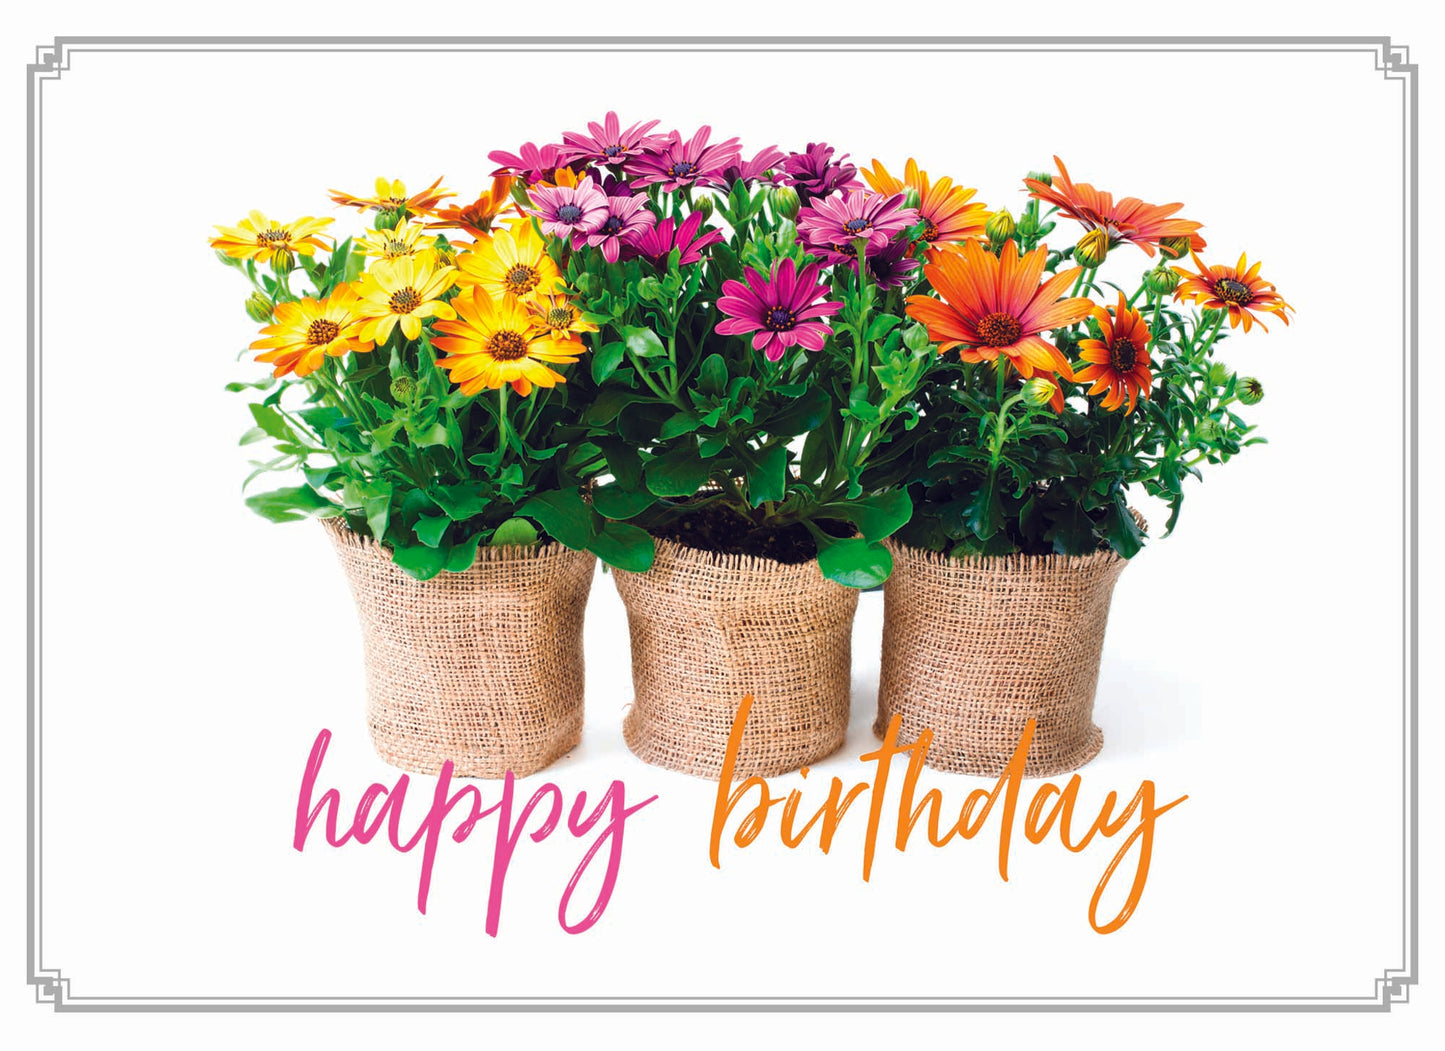 Birthday - Flowers in a Vase - Assorted Birthday Cards, Box of 12